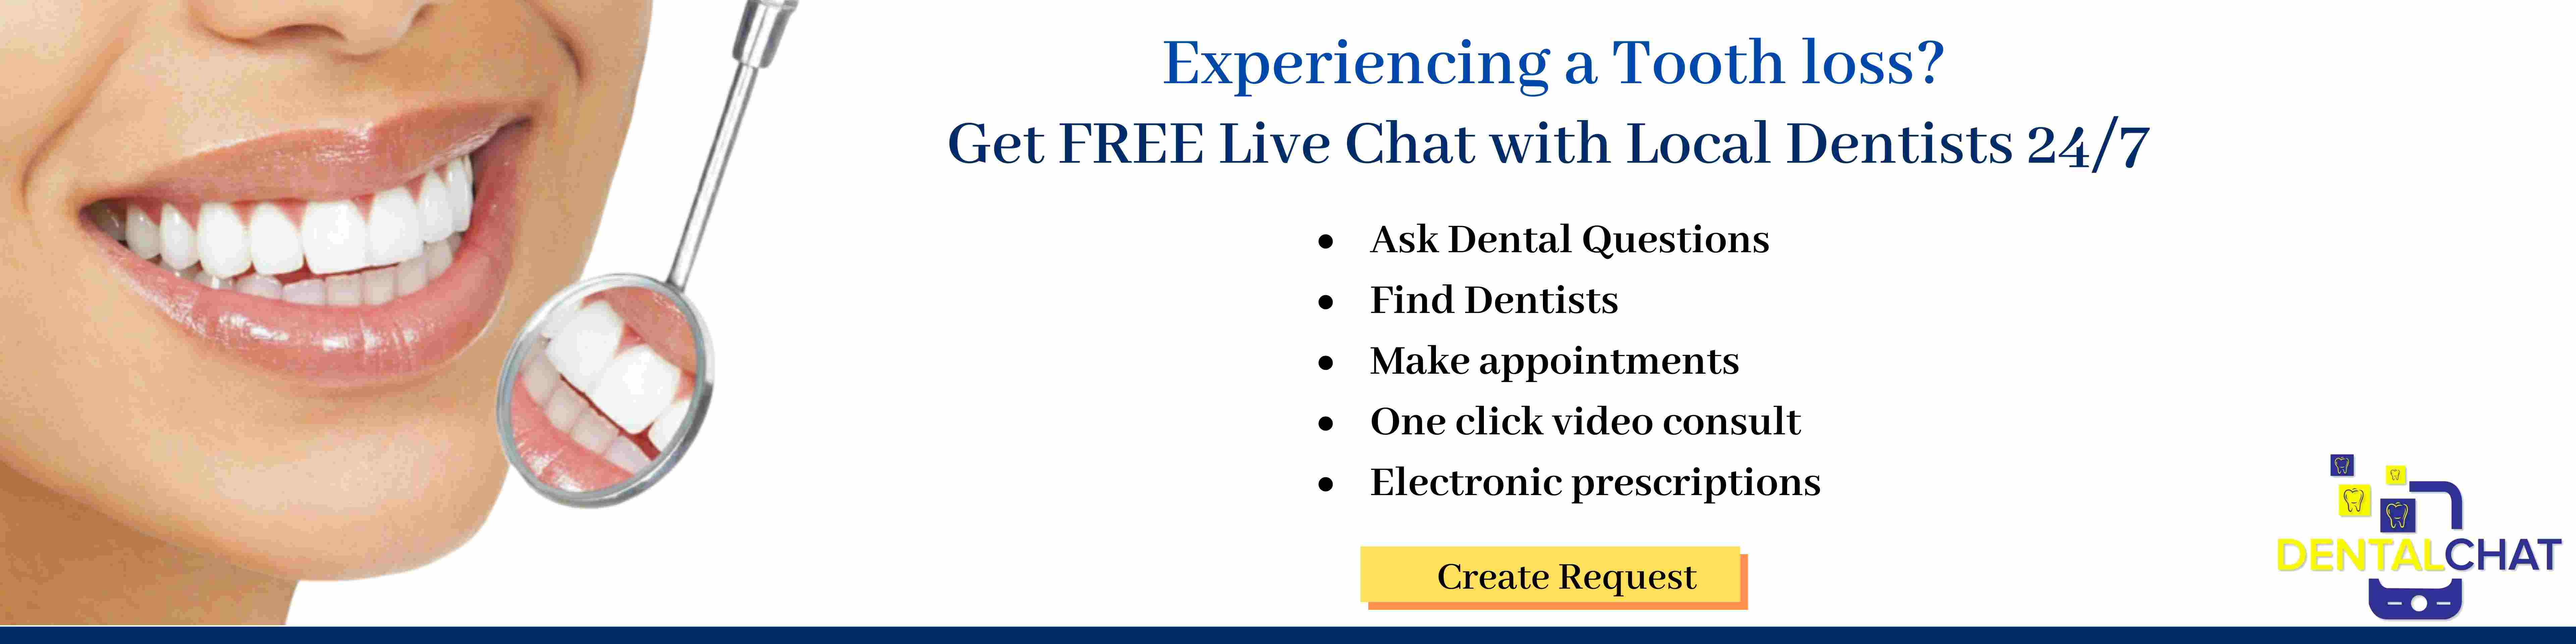 Local tooth loss blogging, online dental bridge chat and local dental implant teledentistry service.